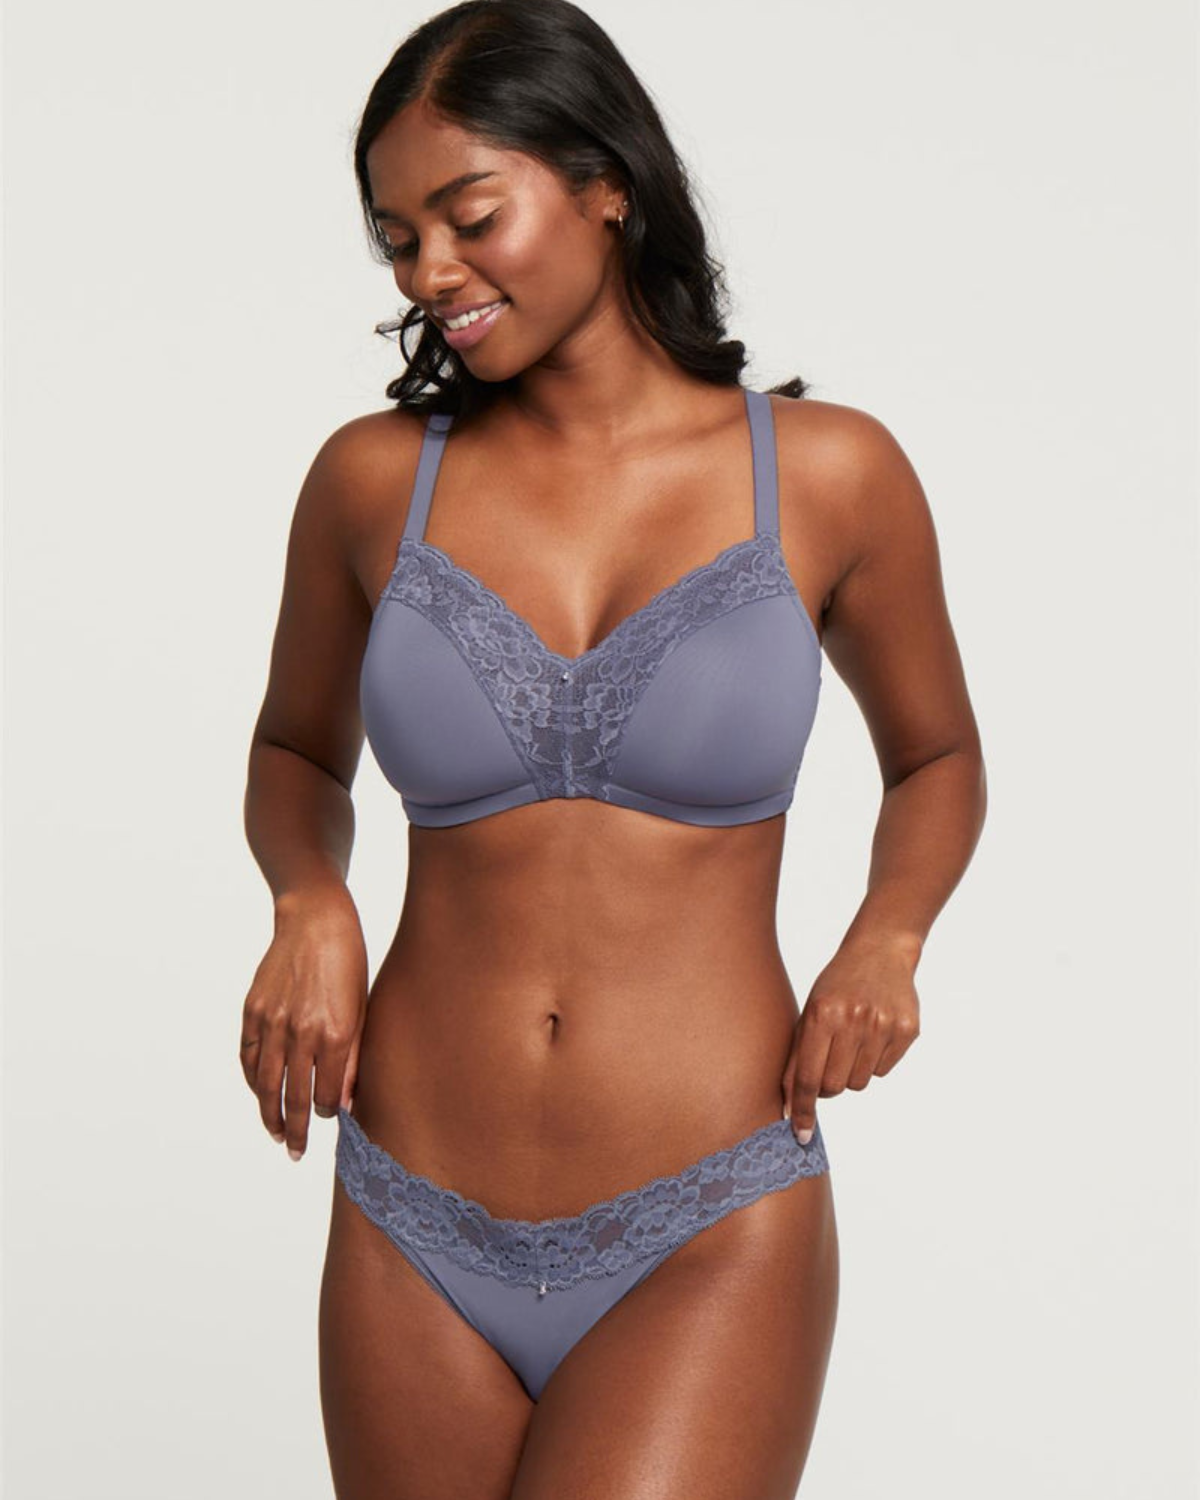 Model wearing a wire free molded cup bra with lace wings in grey